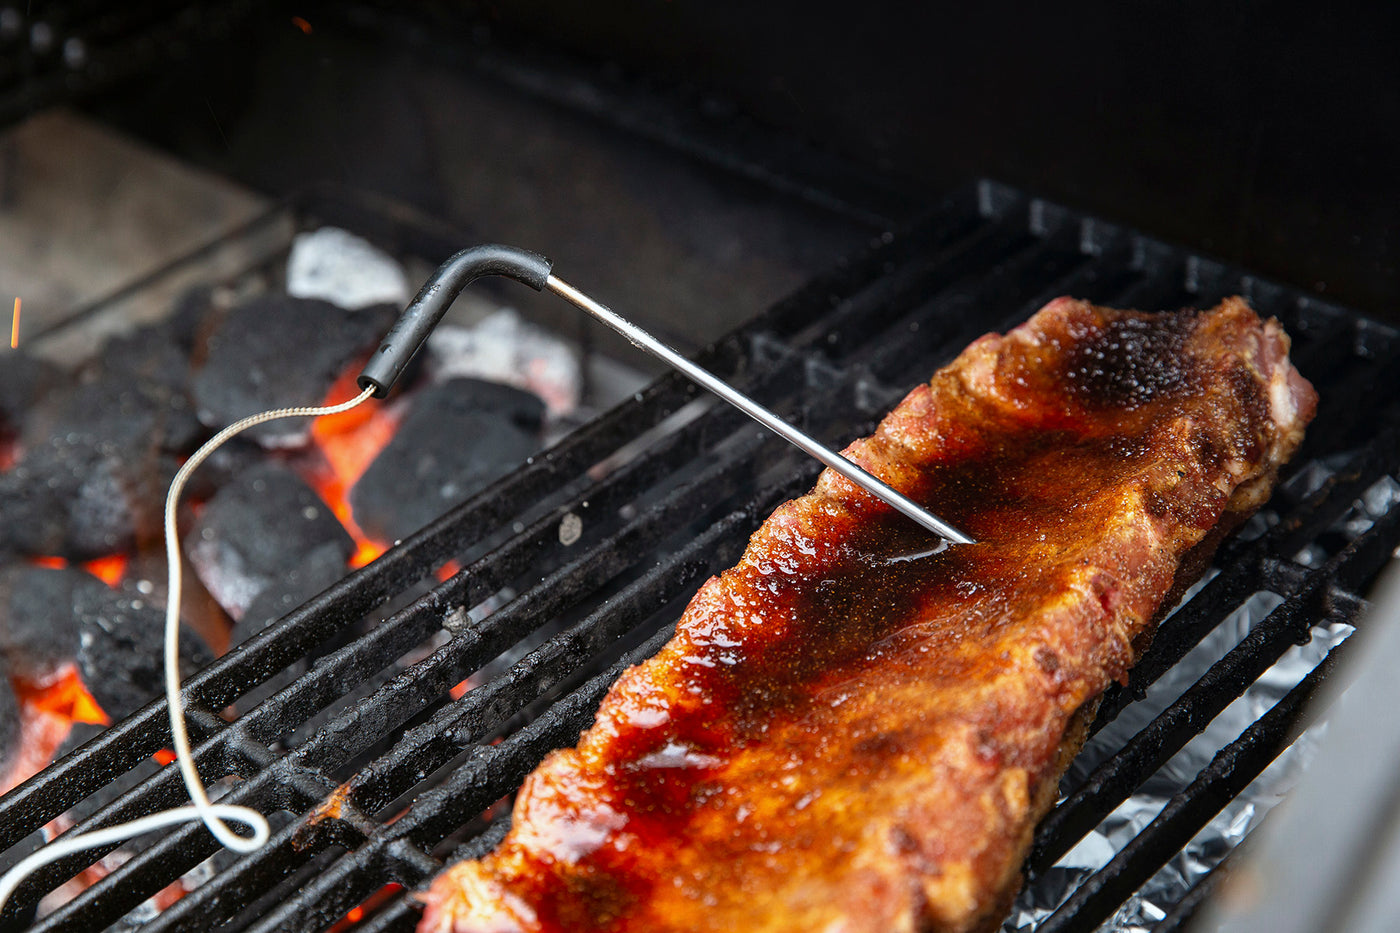 A rack of ribs are shown on the grill with a thermometer stuck in the meat.